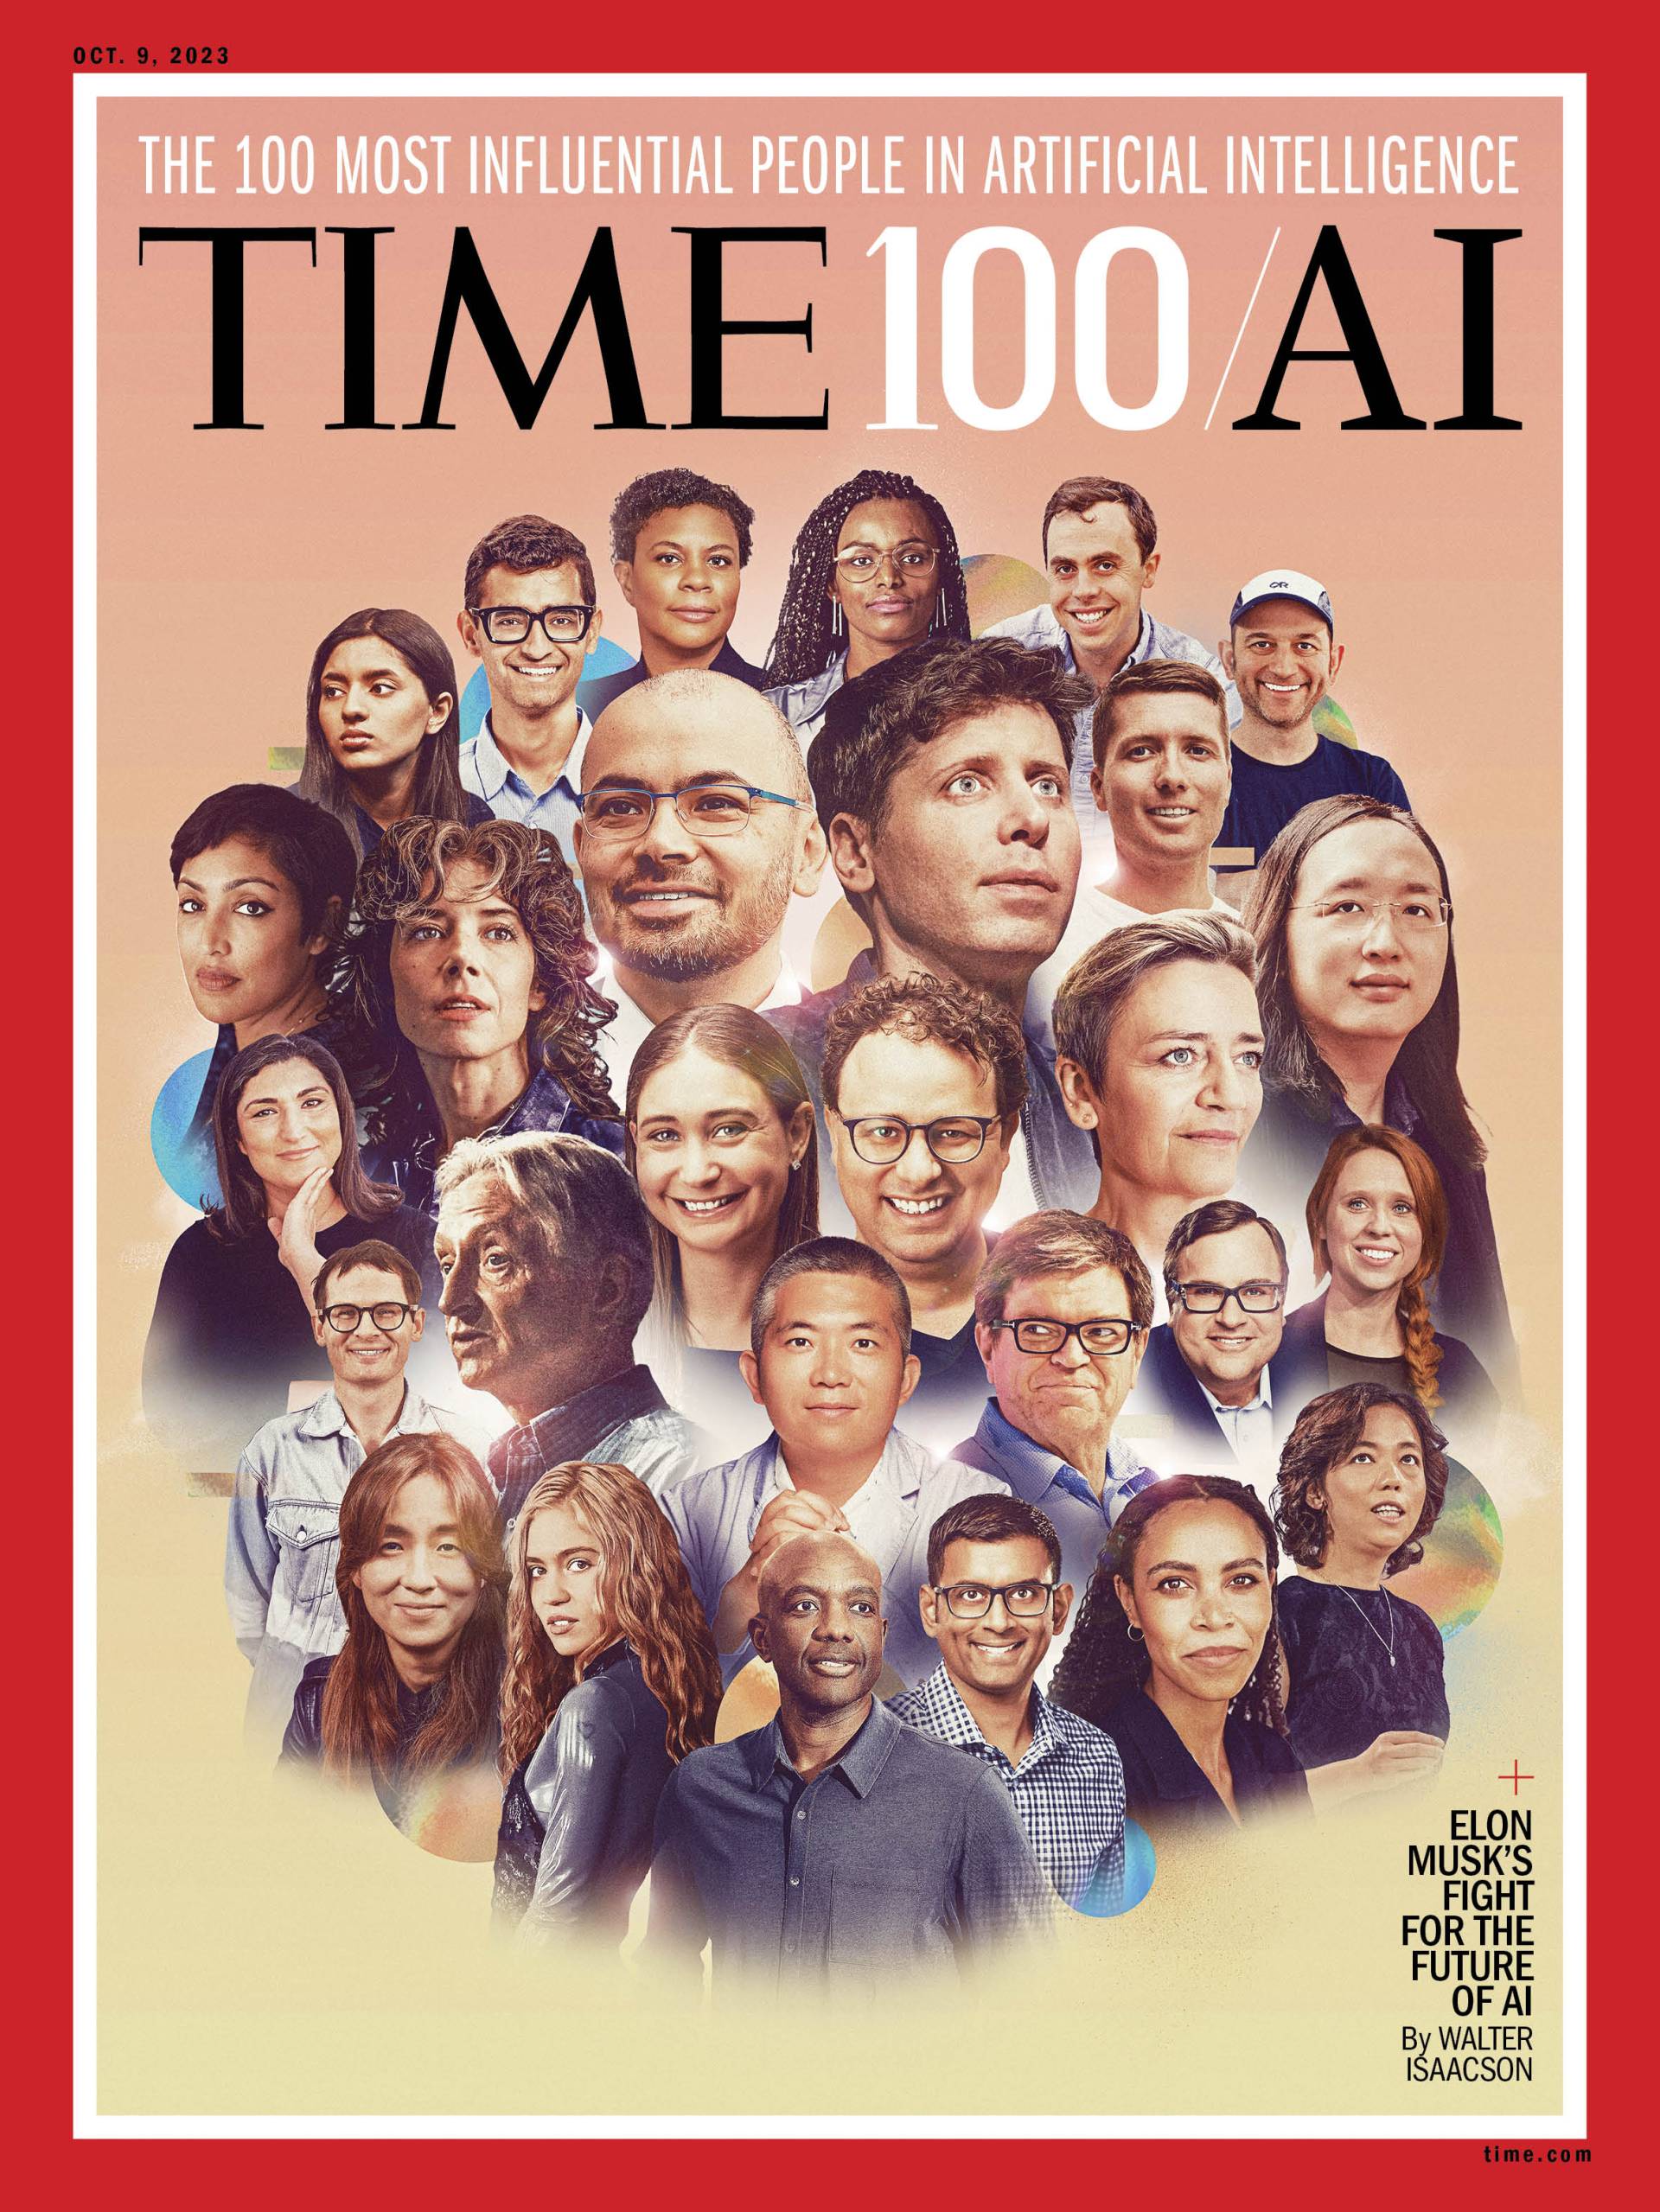 TIME Magazine cover featuring 100 of the most influential people in AI.